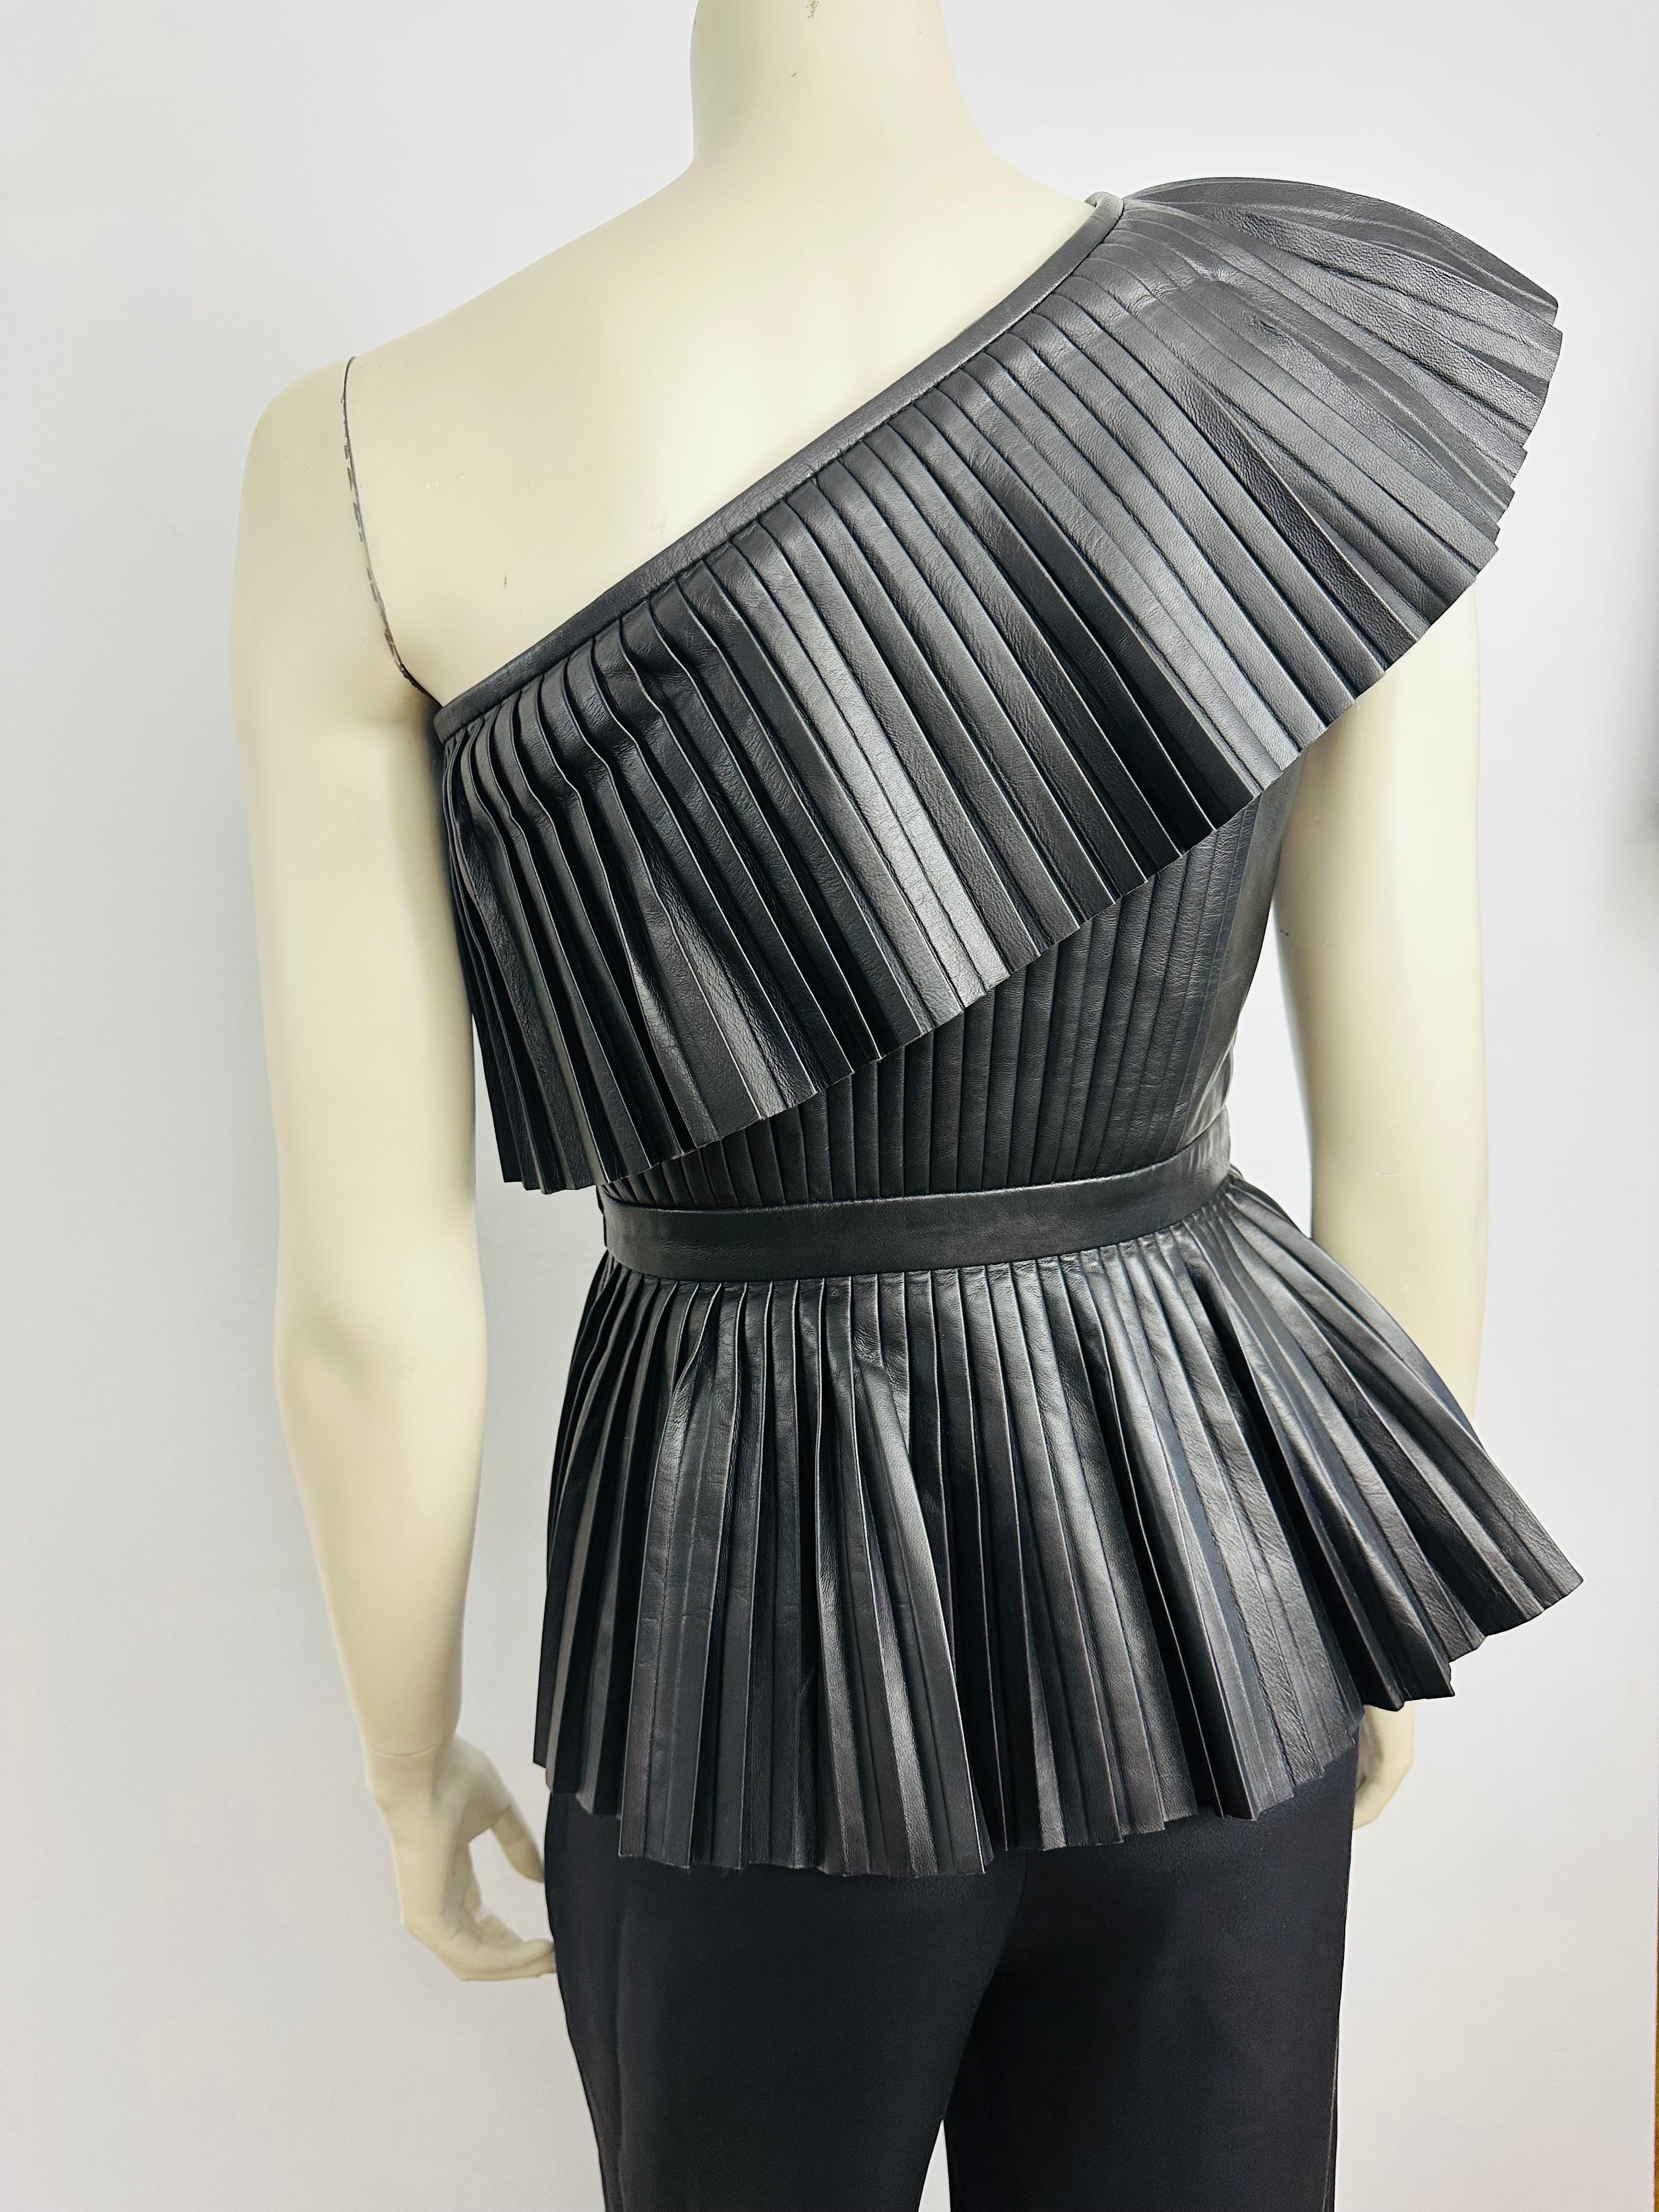 Balmain one shoulder pleated leather top Pre fall 2015 For Sale 5